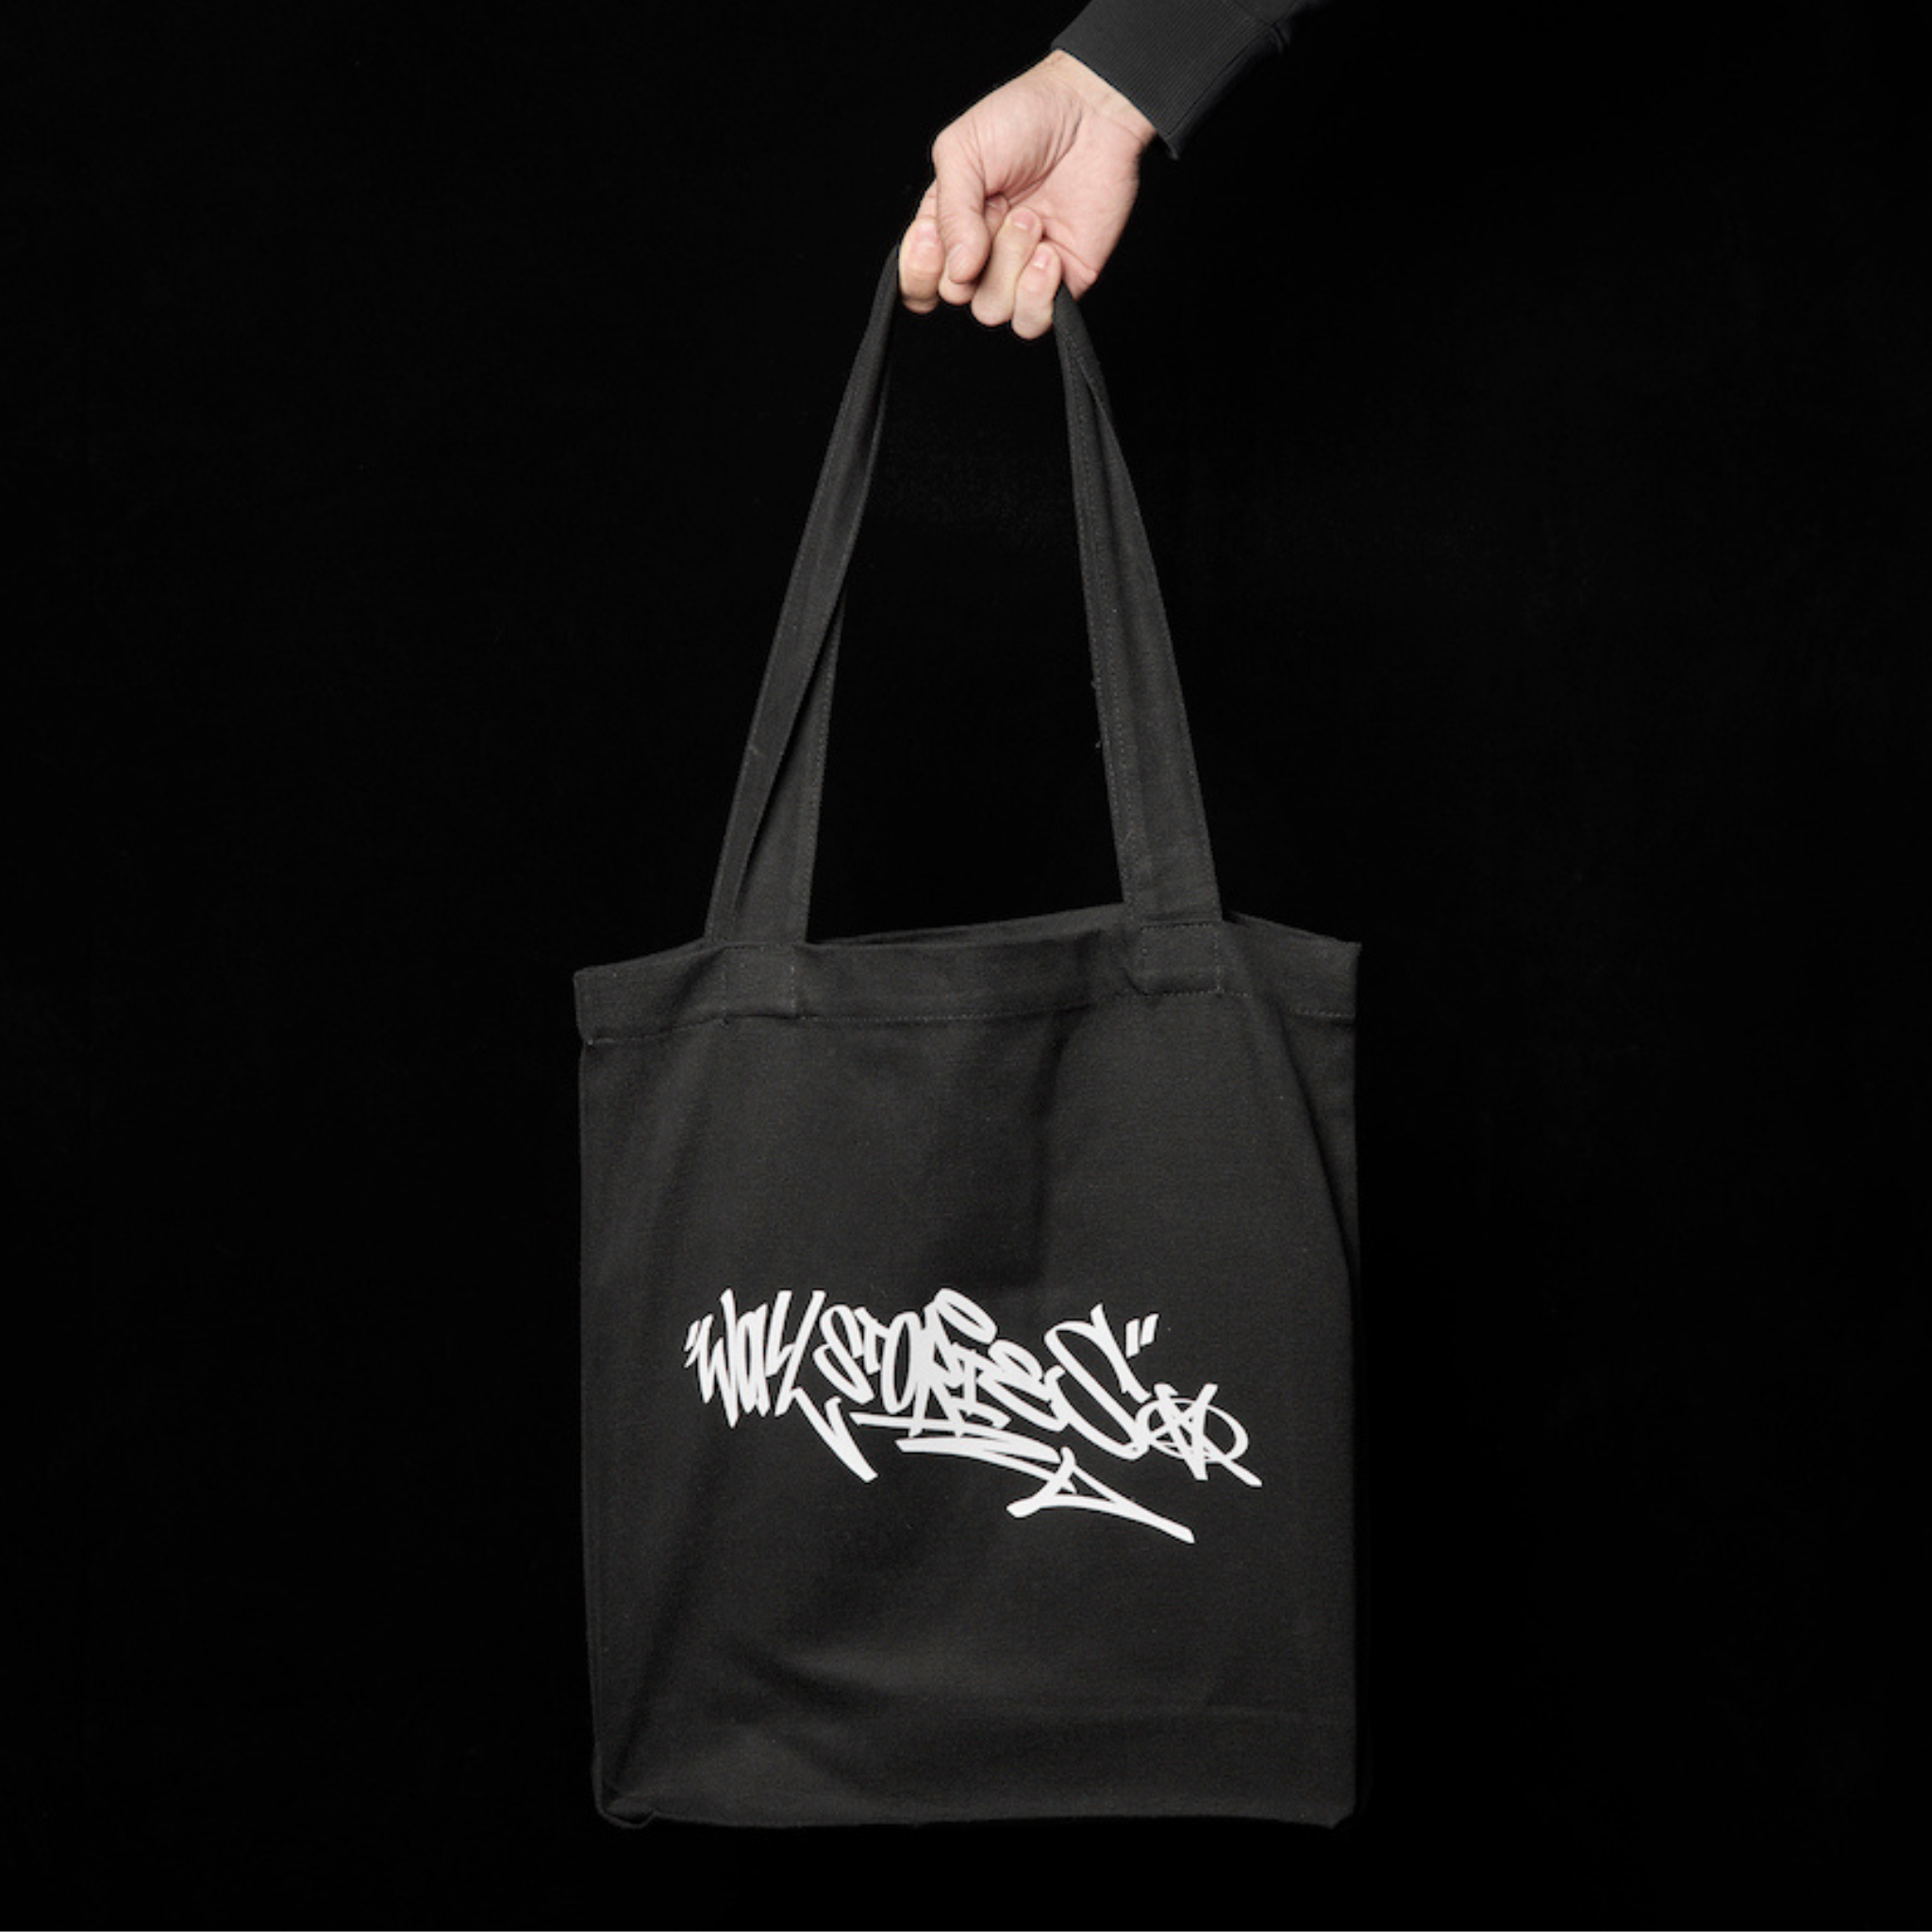 Wall Stories Merchandise - Tote Bag.png